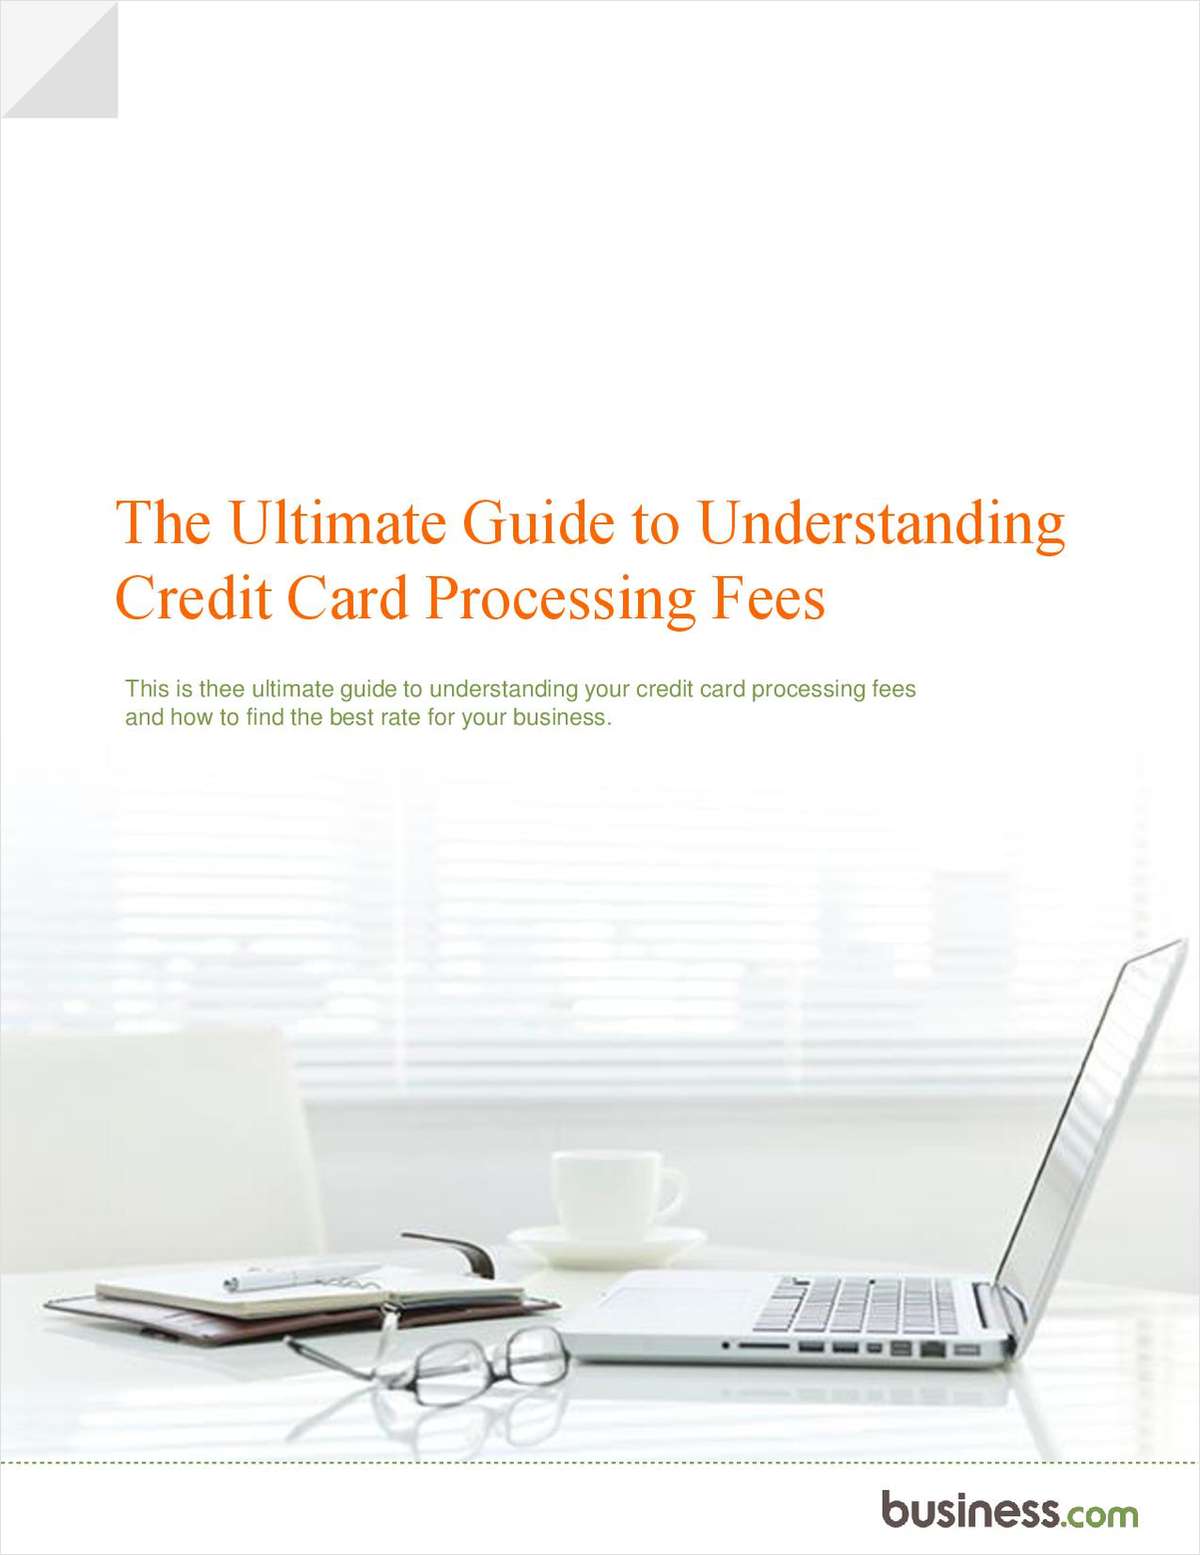 A Merchant's Ultimate Guide to Understanding Credit Card Processing Fees